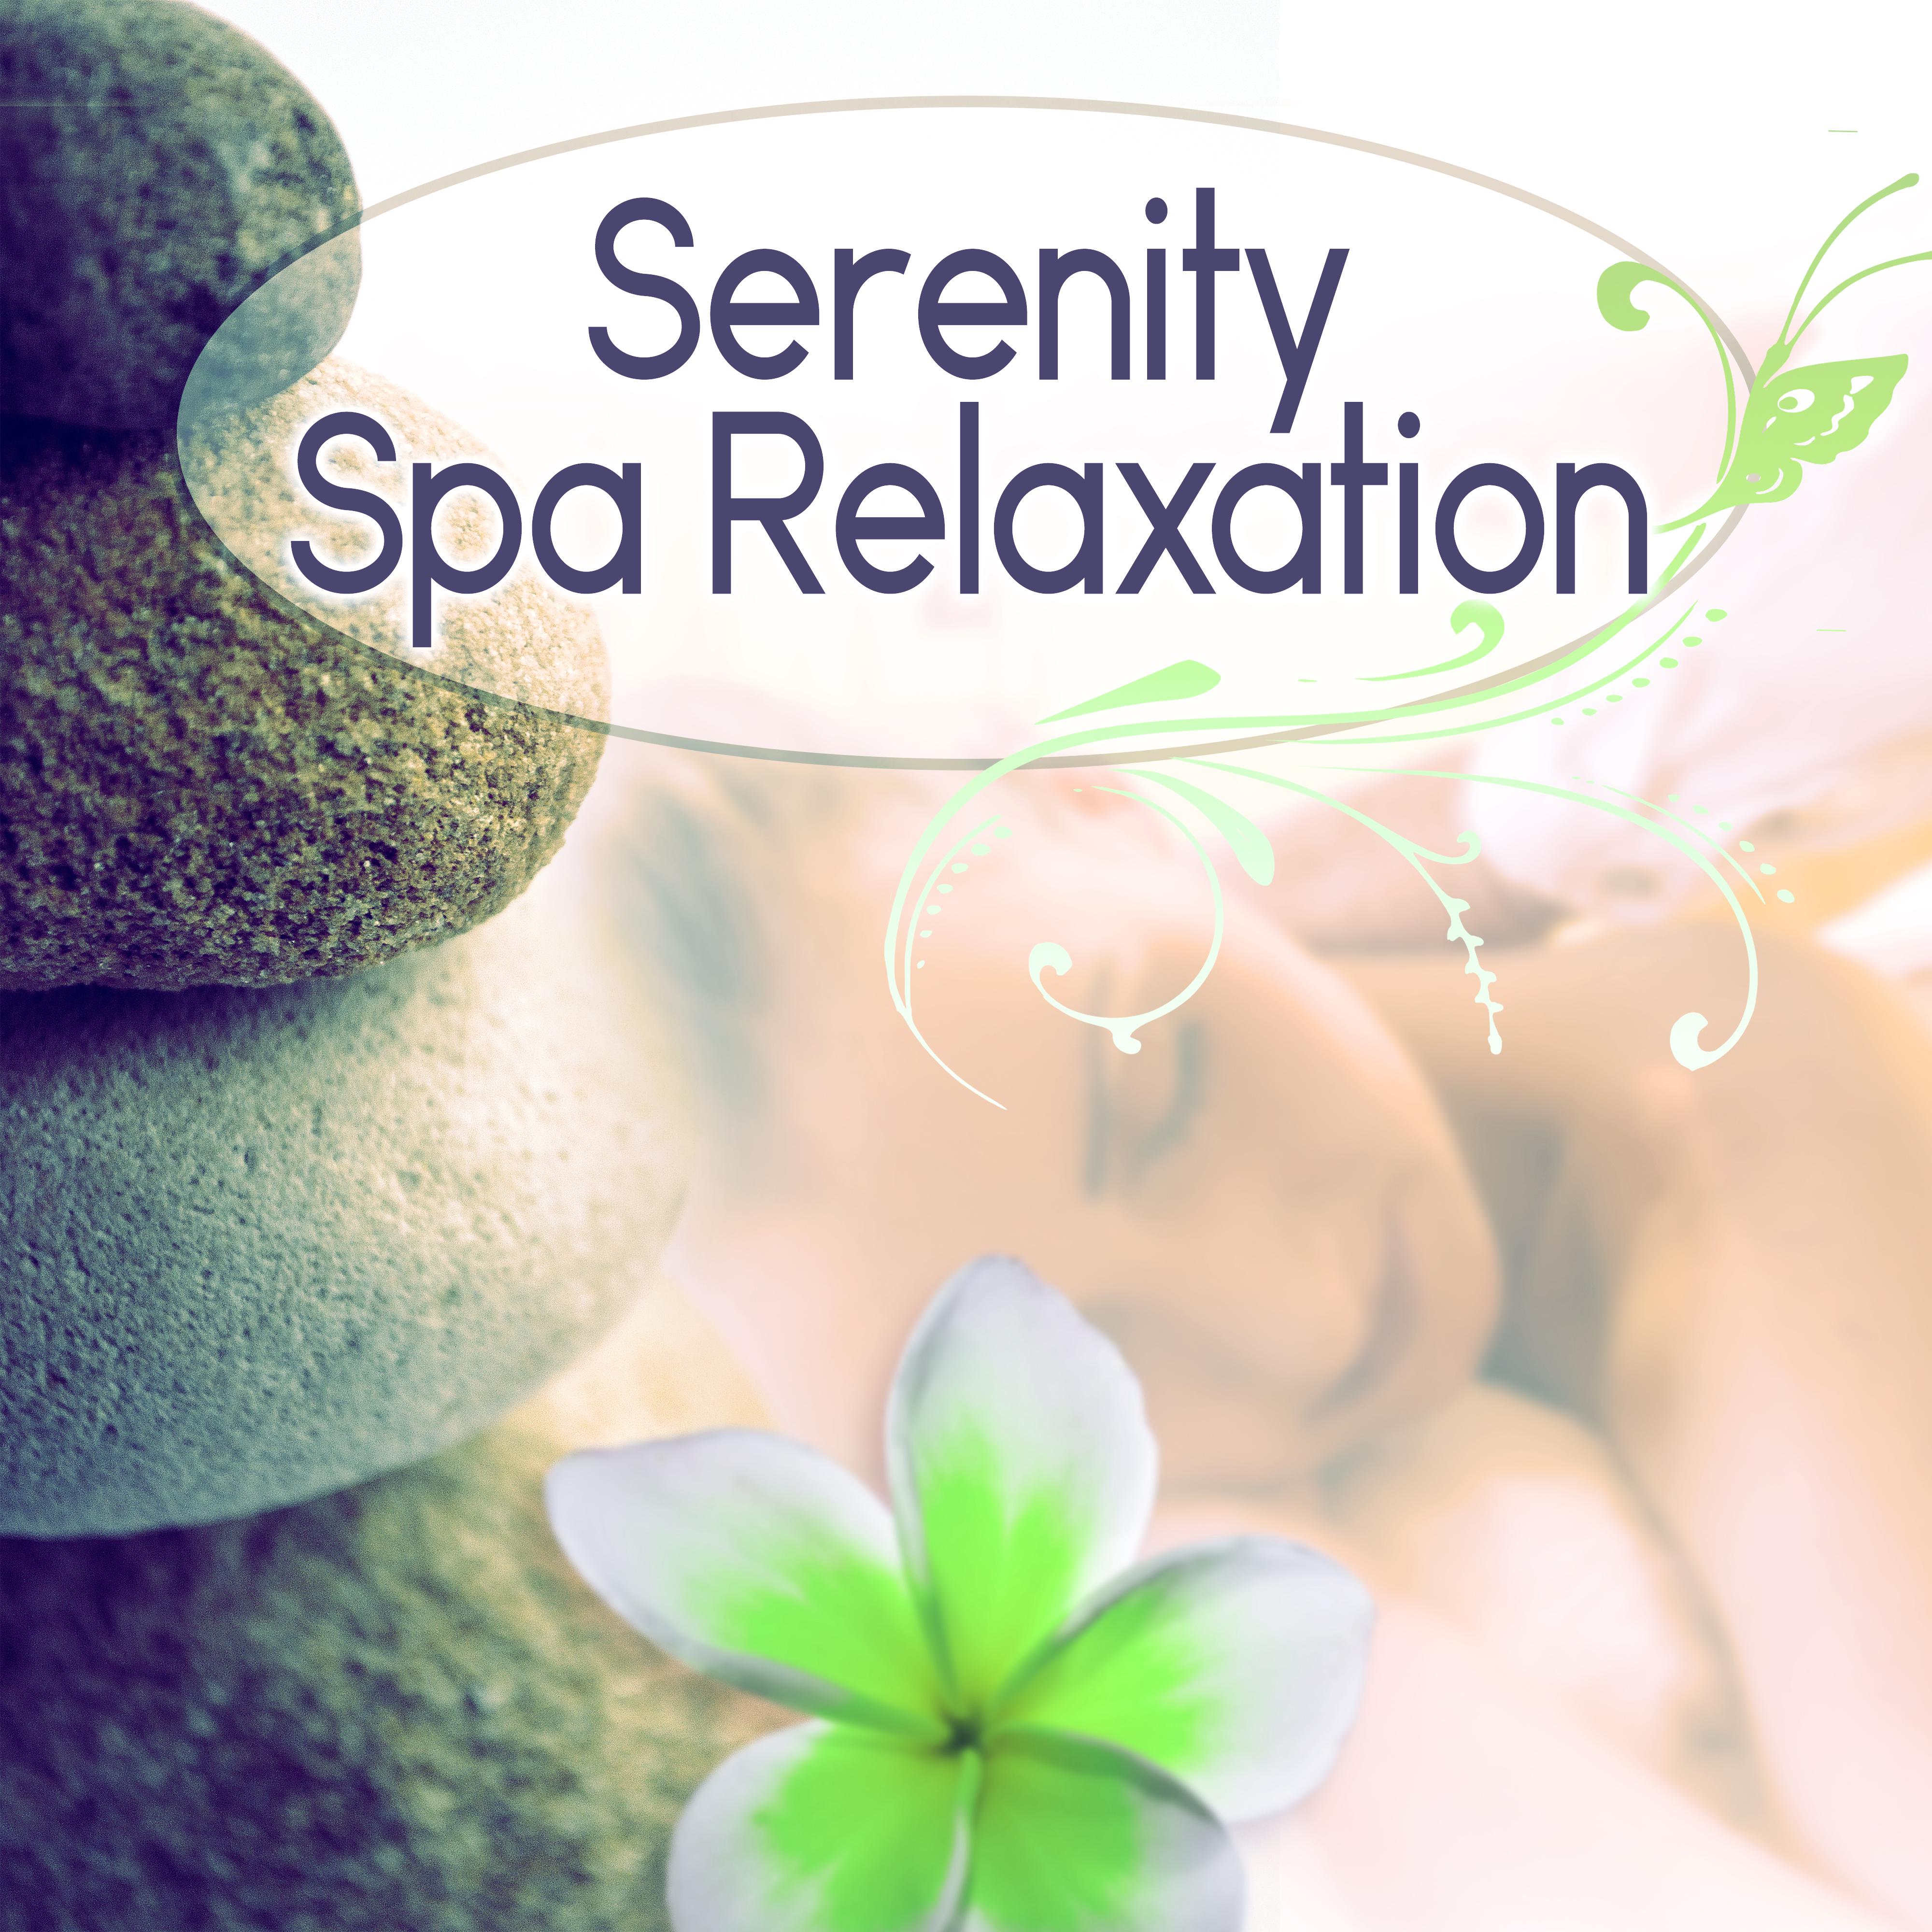 Serenity Spa Relaxation - Bliss SPA, Massage Music, Stress Management, Calming Music